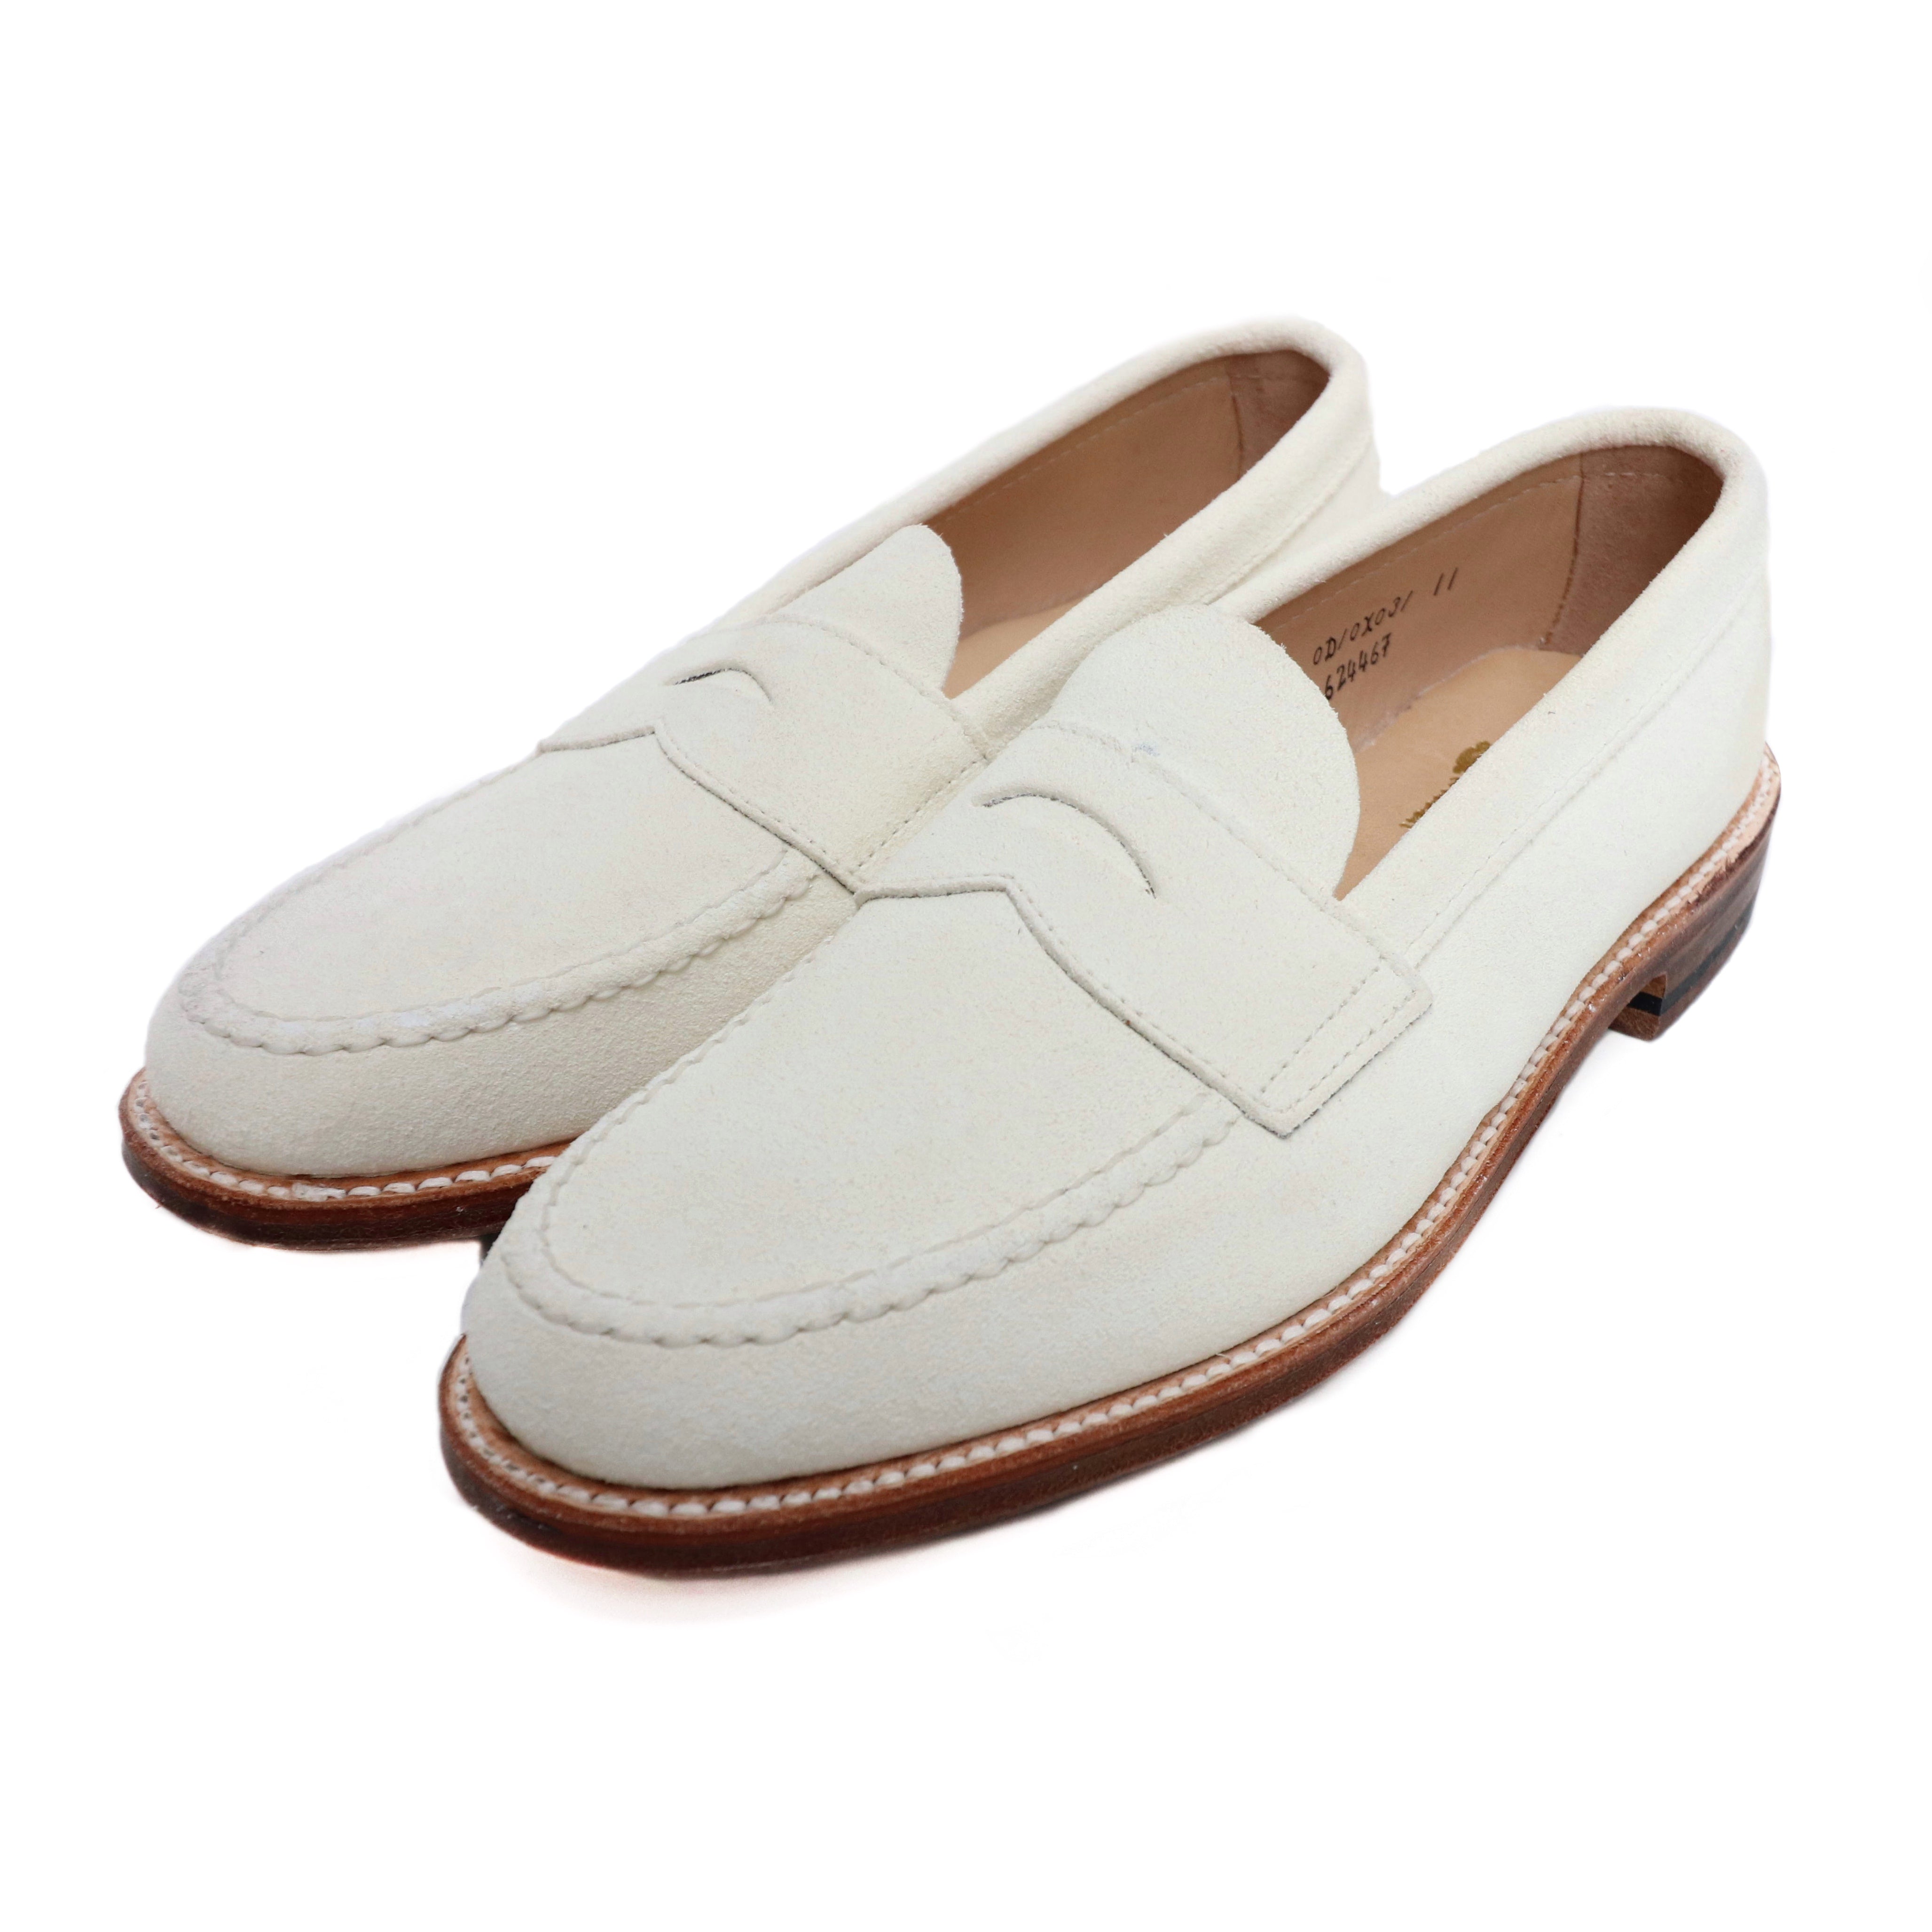 ALDEN 62446F WHITE UNLINED PENNY LOAFER COLONY CLOTHING